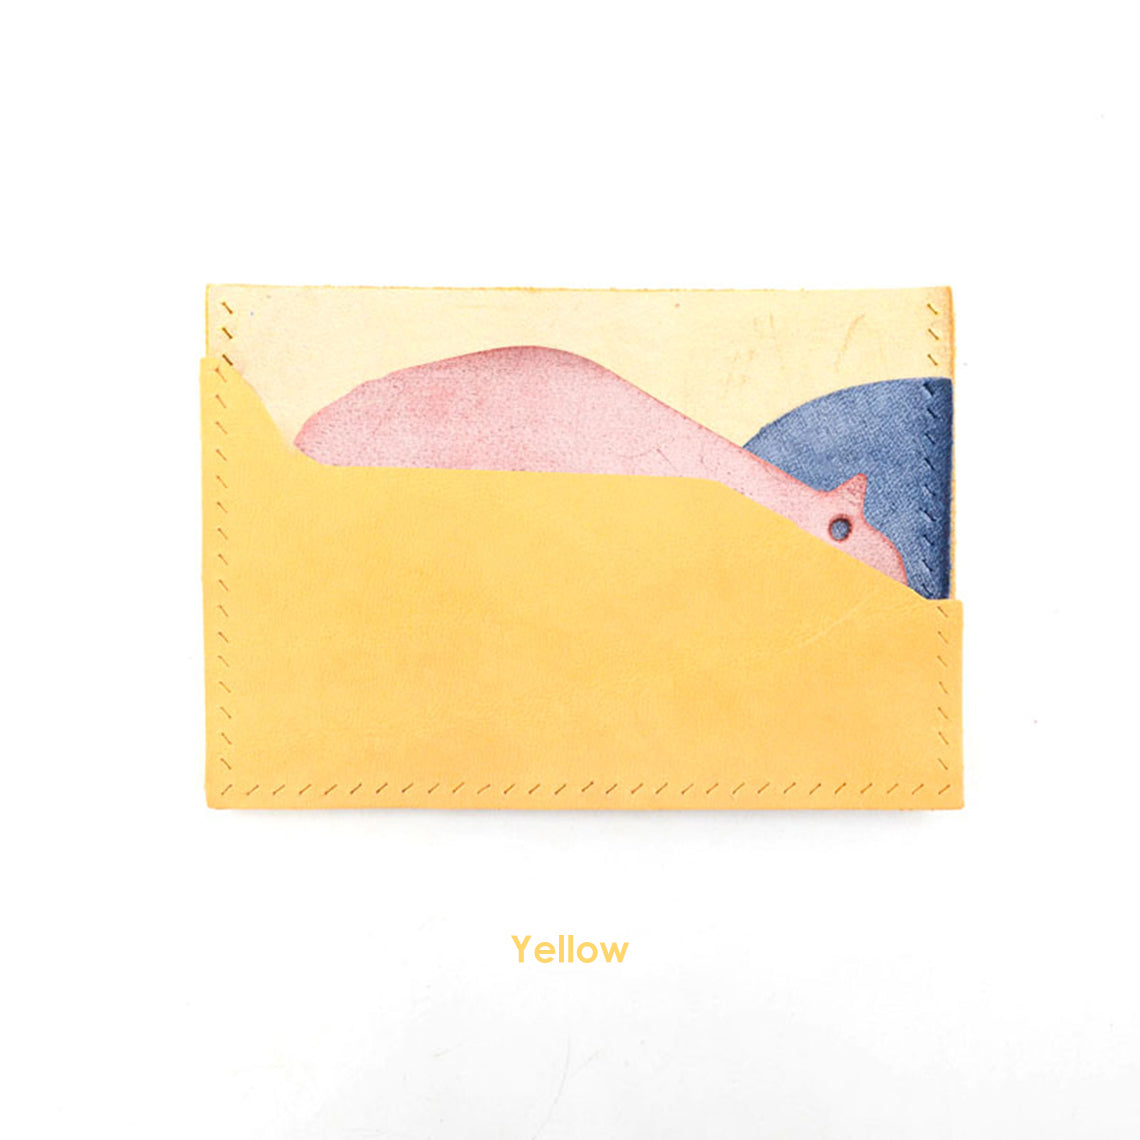 Animal Leather Card Holder in Yellow | DIY Leather Craft Kits - POPSEWING™